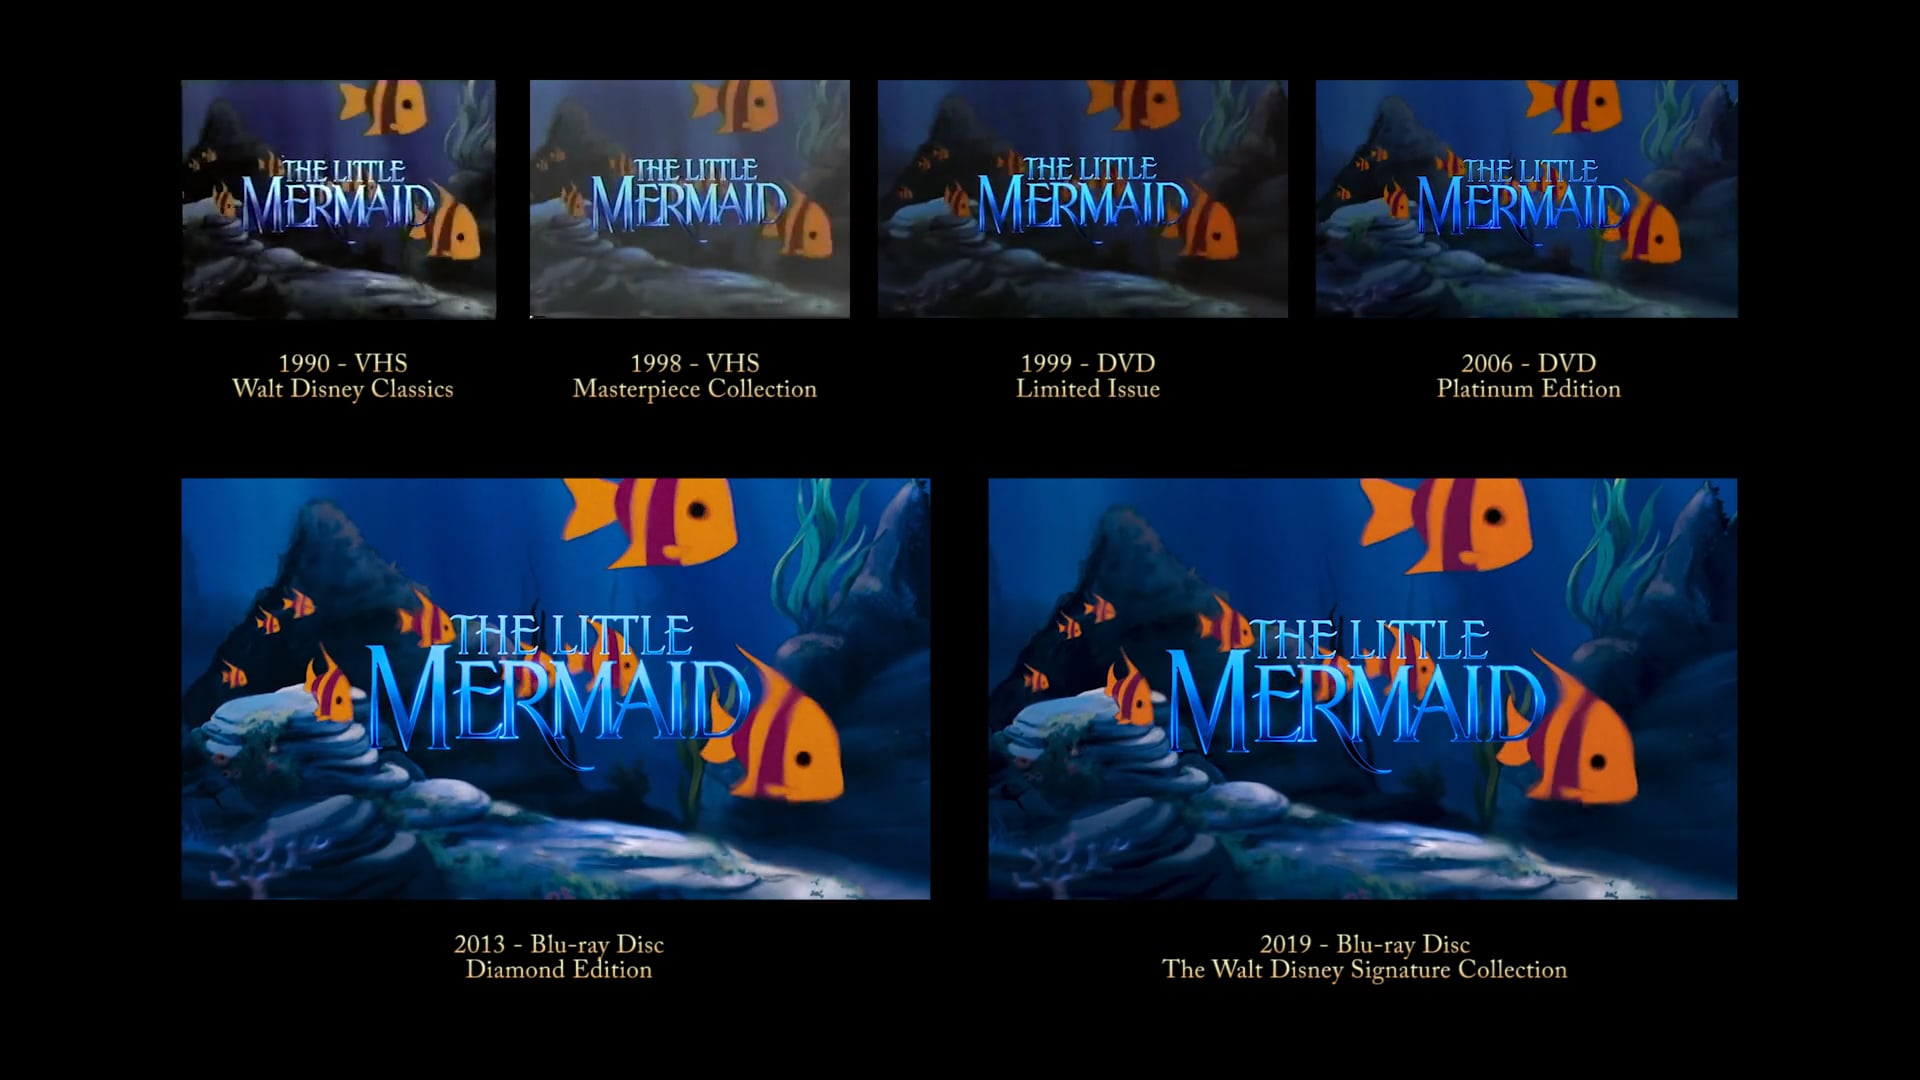 The Little Mermaid 30 Years of Video Editions Comparison on Vimeo